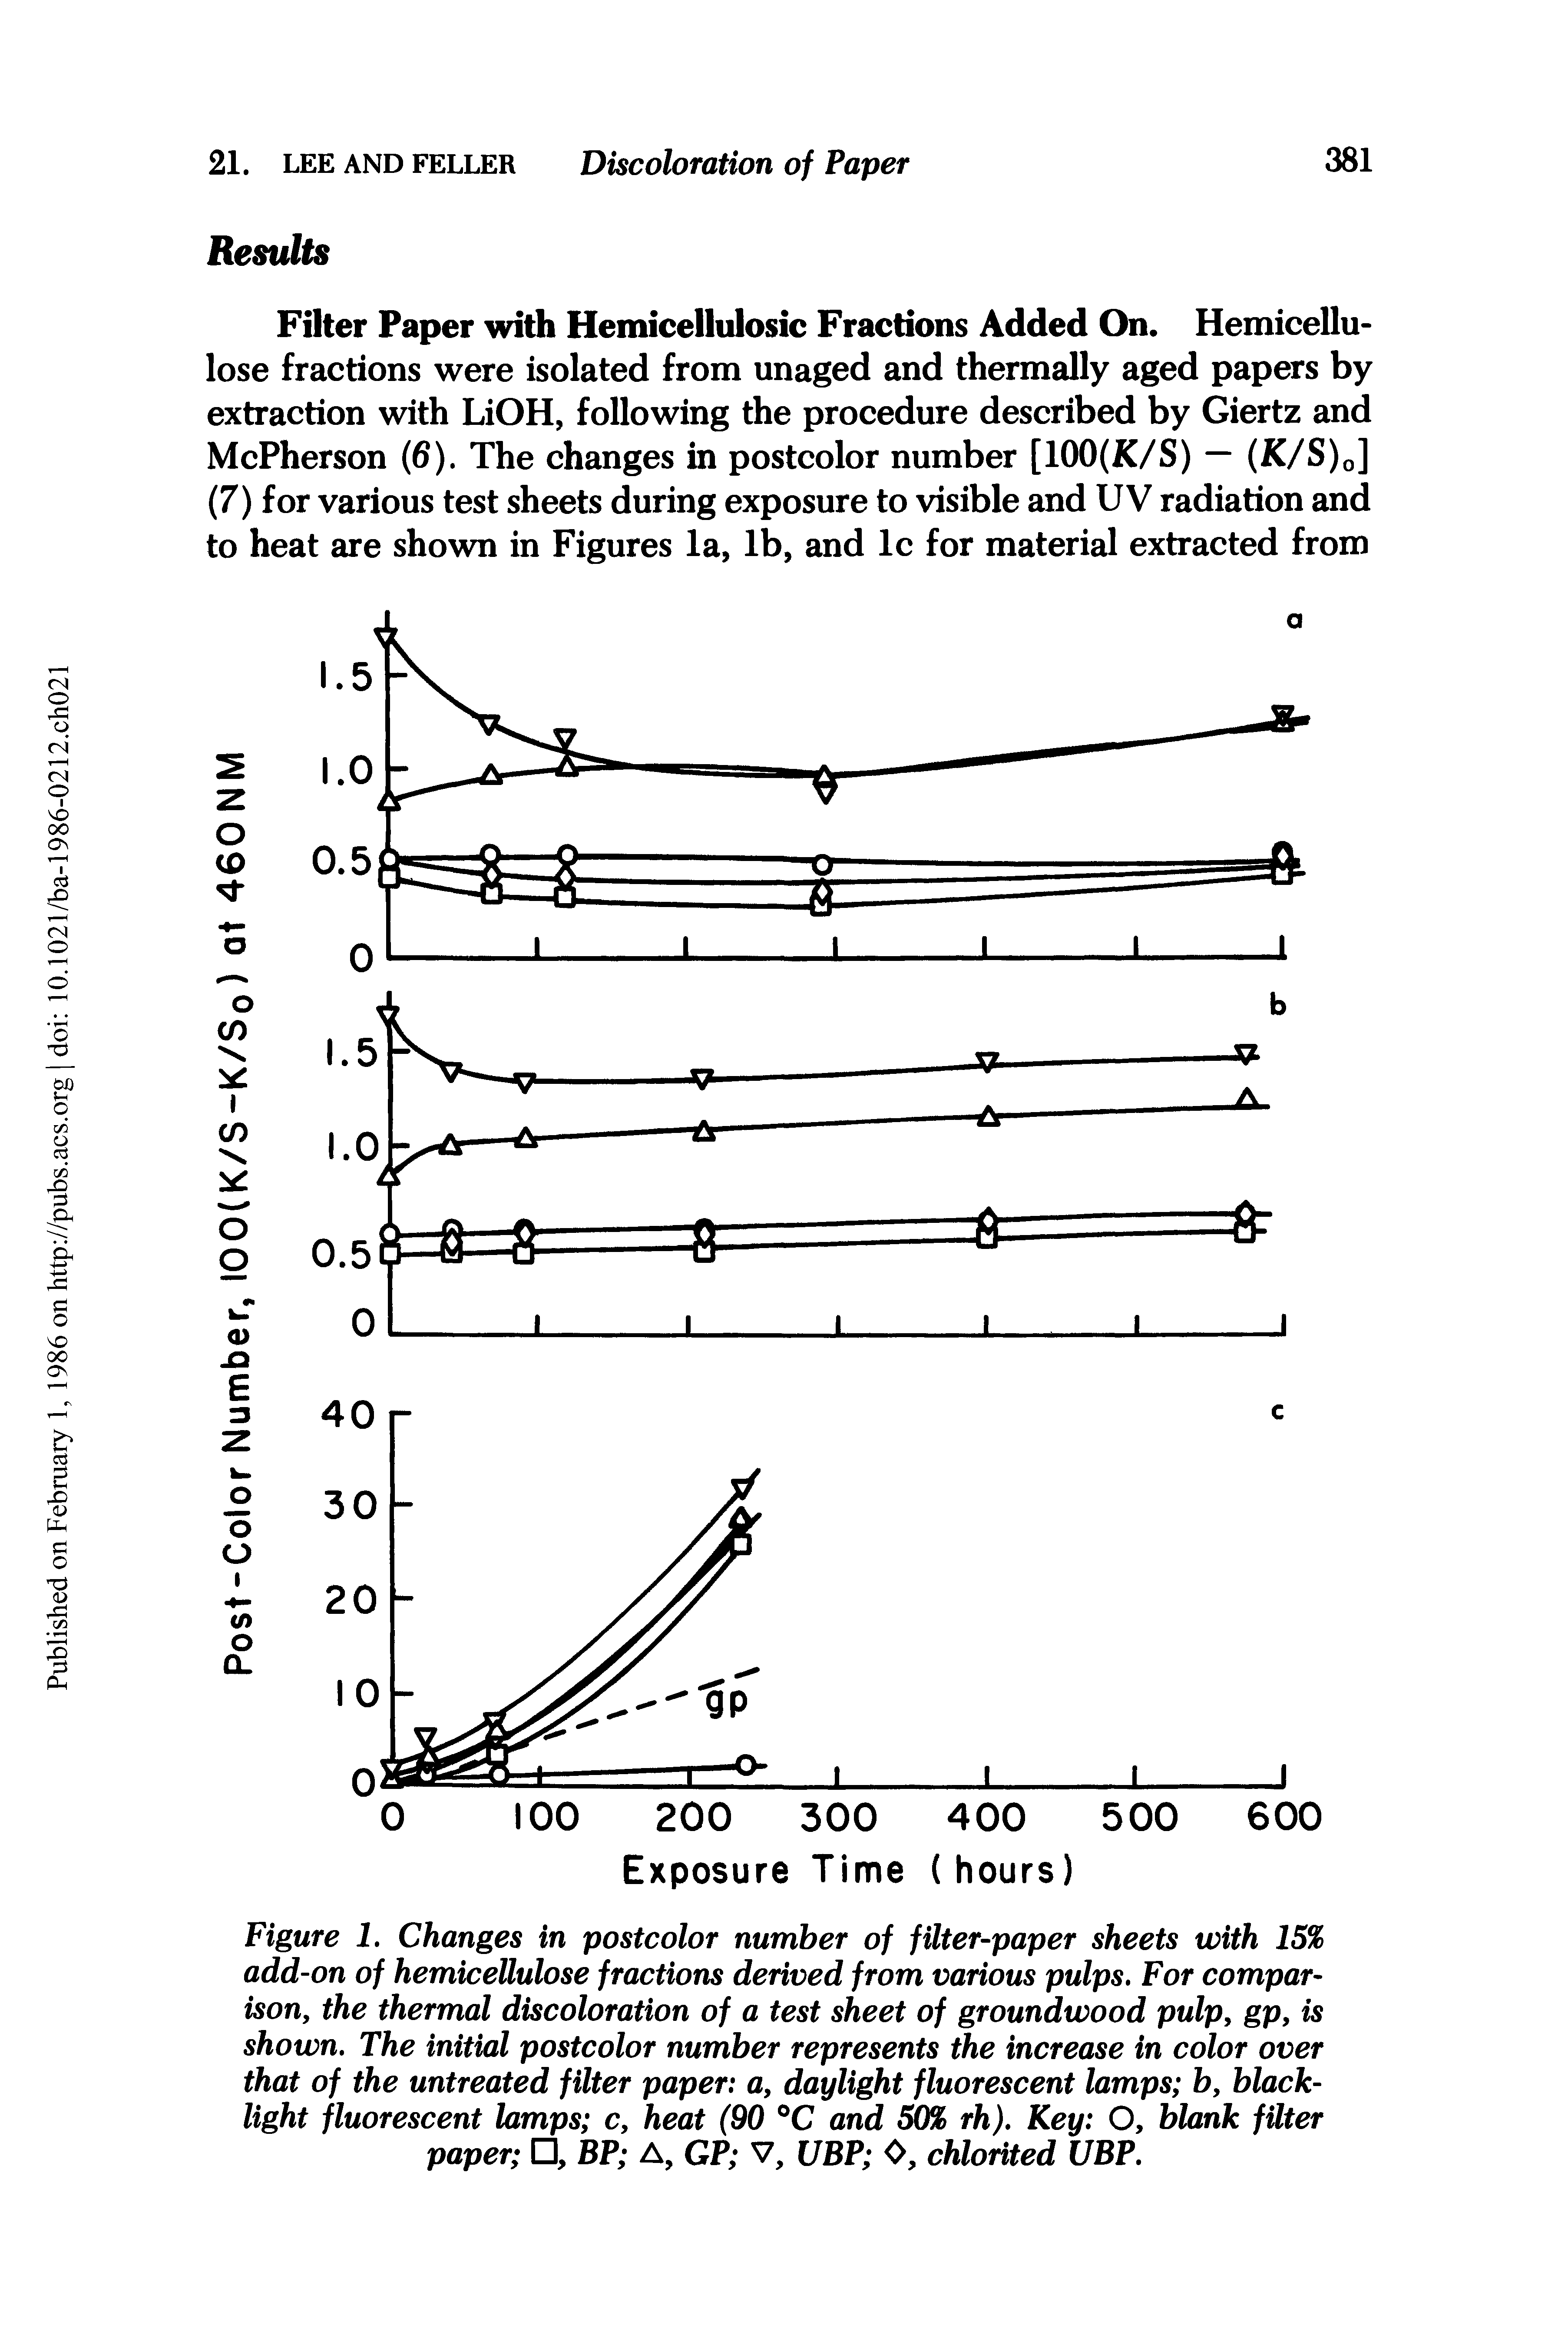 Figure 1. Changes in postcolor number of filter-paper sheets with 15% add-on of hemicellulose fractions derived from various pulps. For comparison, the thermal discoloration of a test sheet of groundwood pulp, gp, is shown. The initial postcolor number represents the increase in color over that of the untreated filter paper a, daylight fluorescent lamps b, black-light fluorescent lamps c, heat (90 °C and 50% rh). Key O, blank filter paper , BP A, GP V, UBP 0, chlorited UBP.